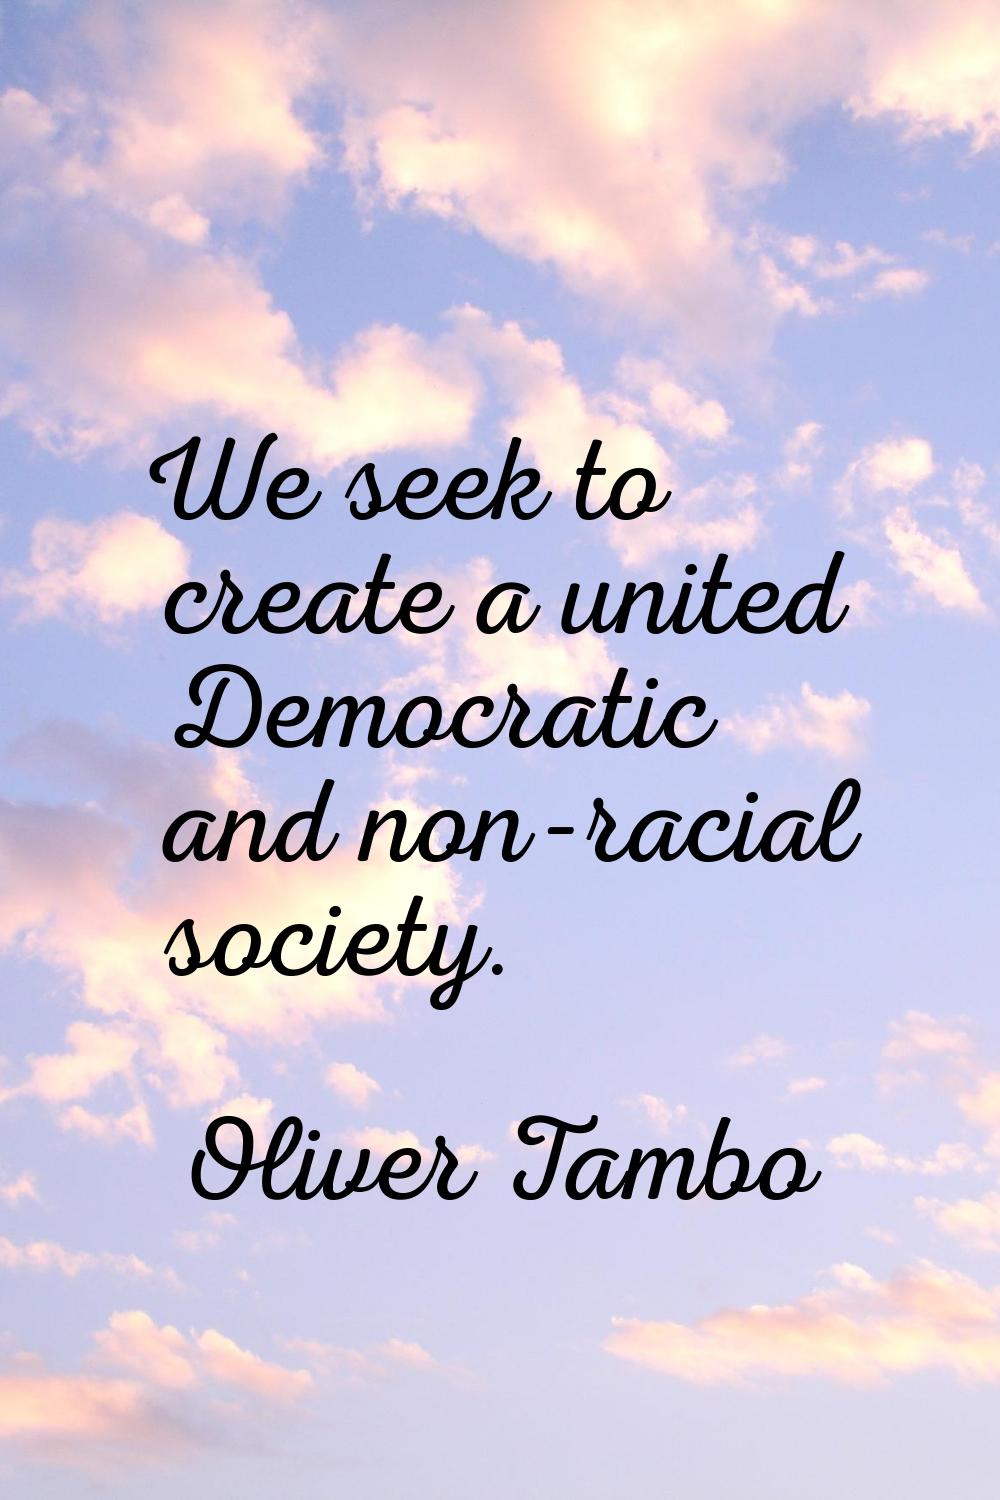 We seek to create a united Democratic and non-racial society.